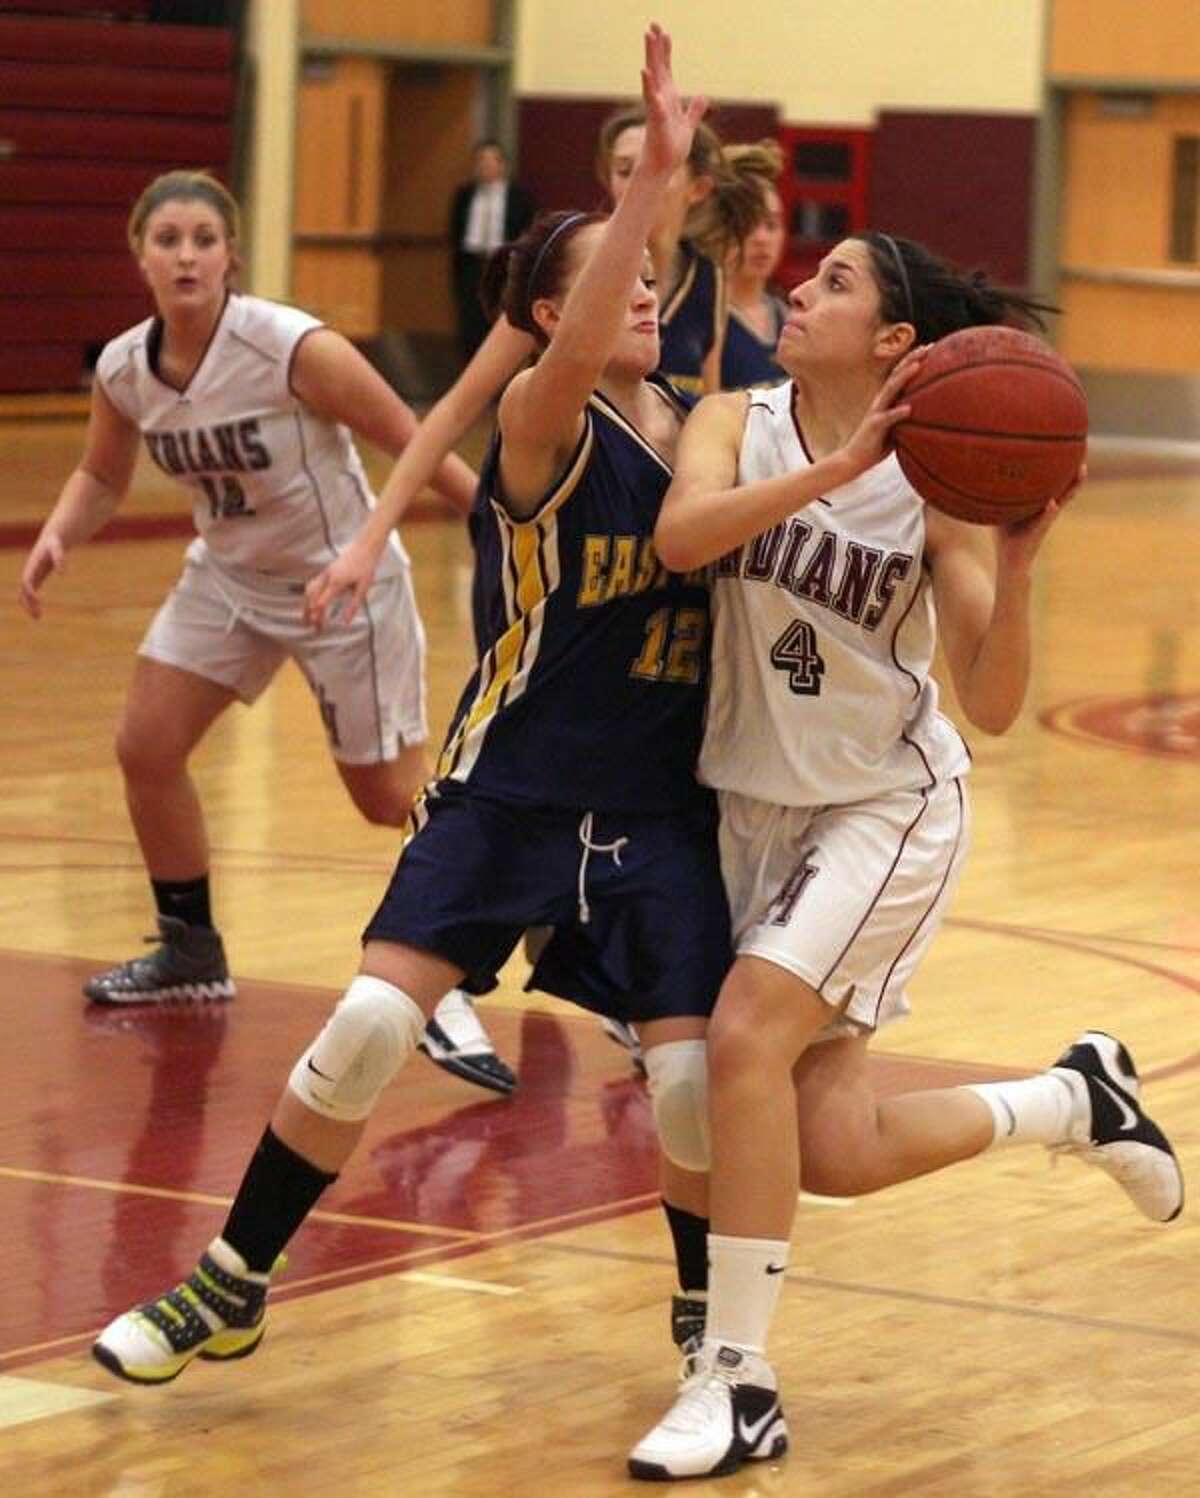 Photo by Russ McCreven North Haven's Olivia DiCapua looks to shoot while East Haven's Julie Waters defends in the Indians’ 39-28 victory.